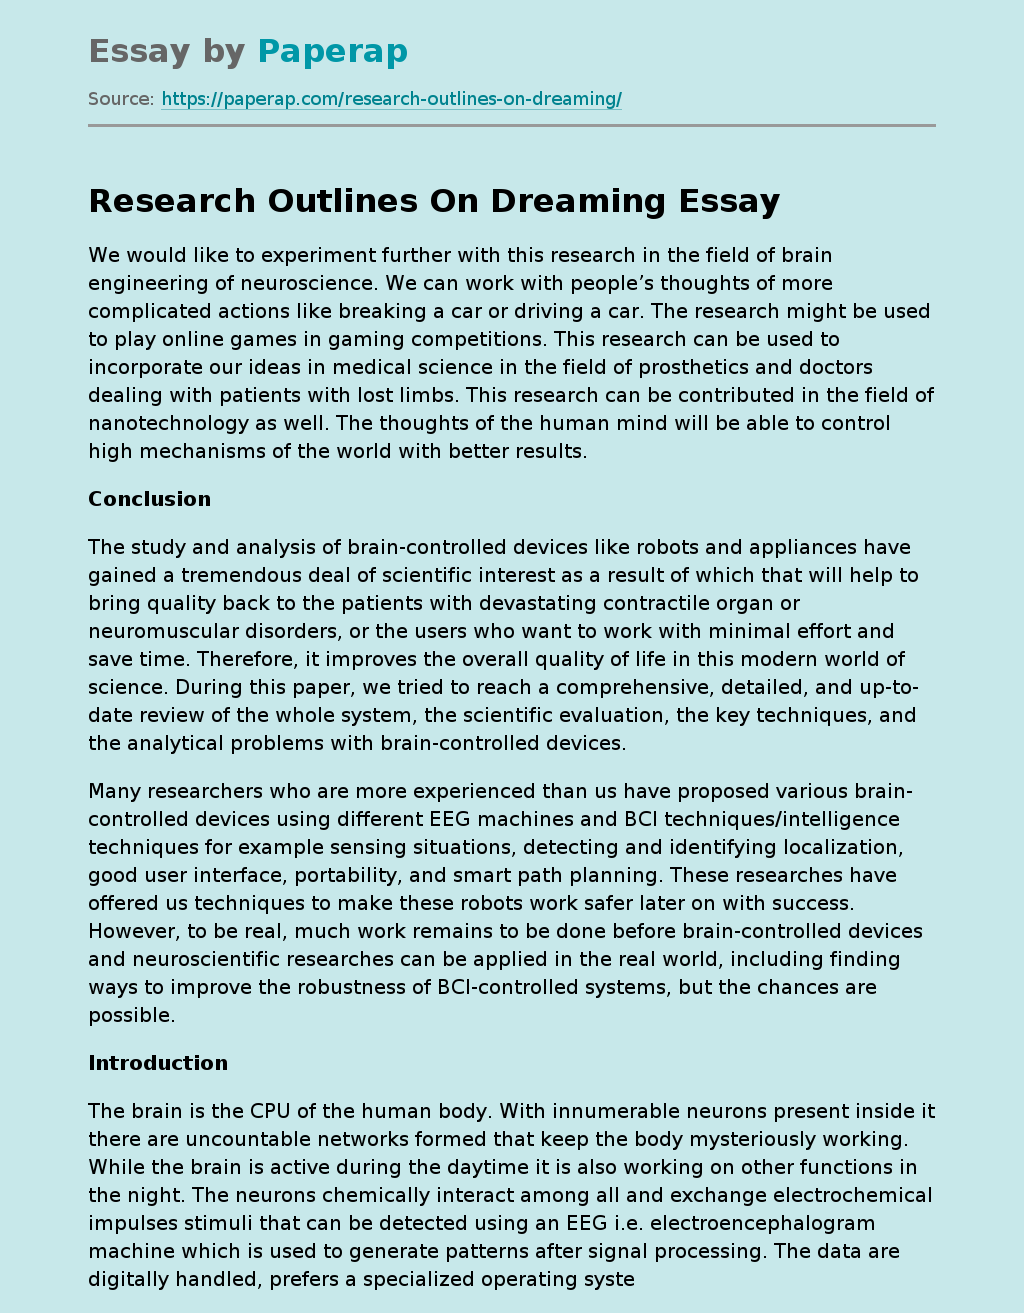 Research Outlines On Dreaming